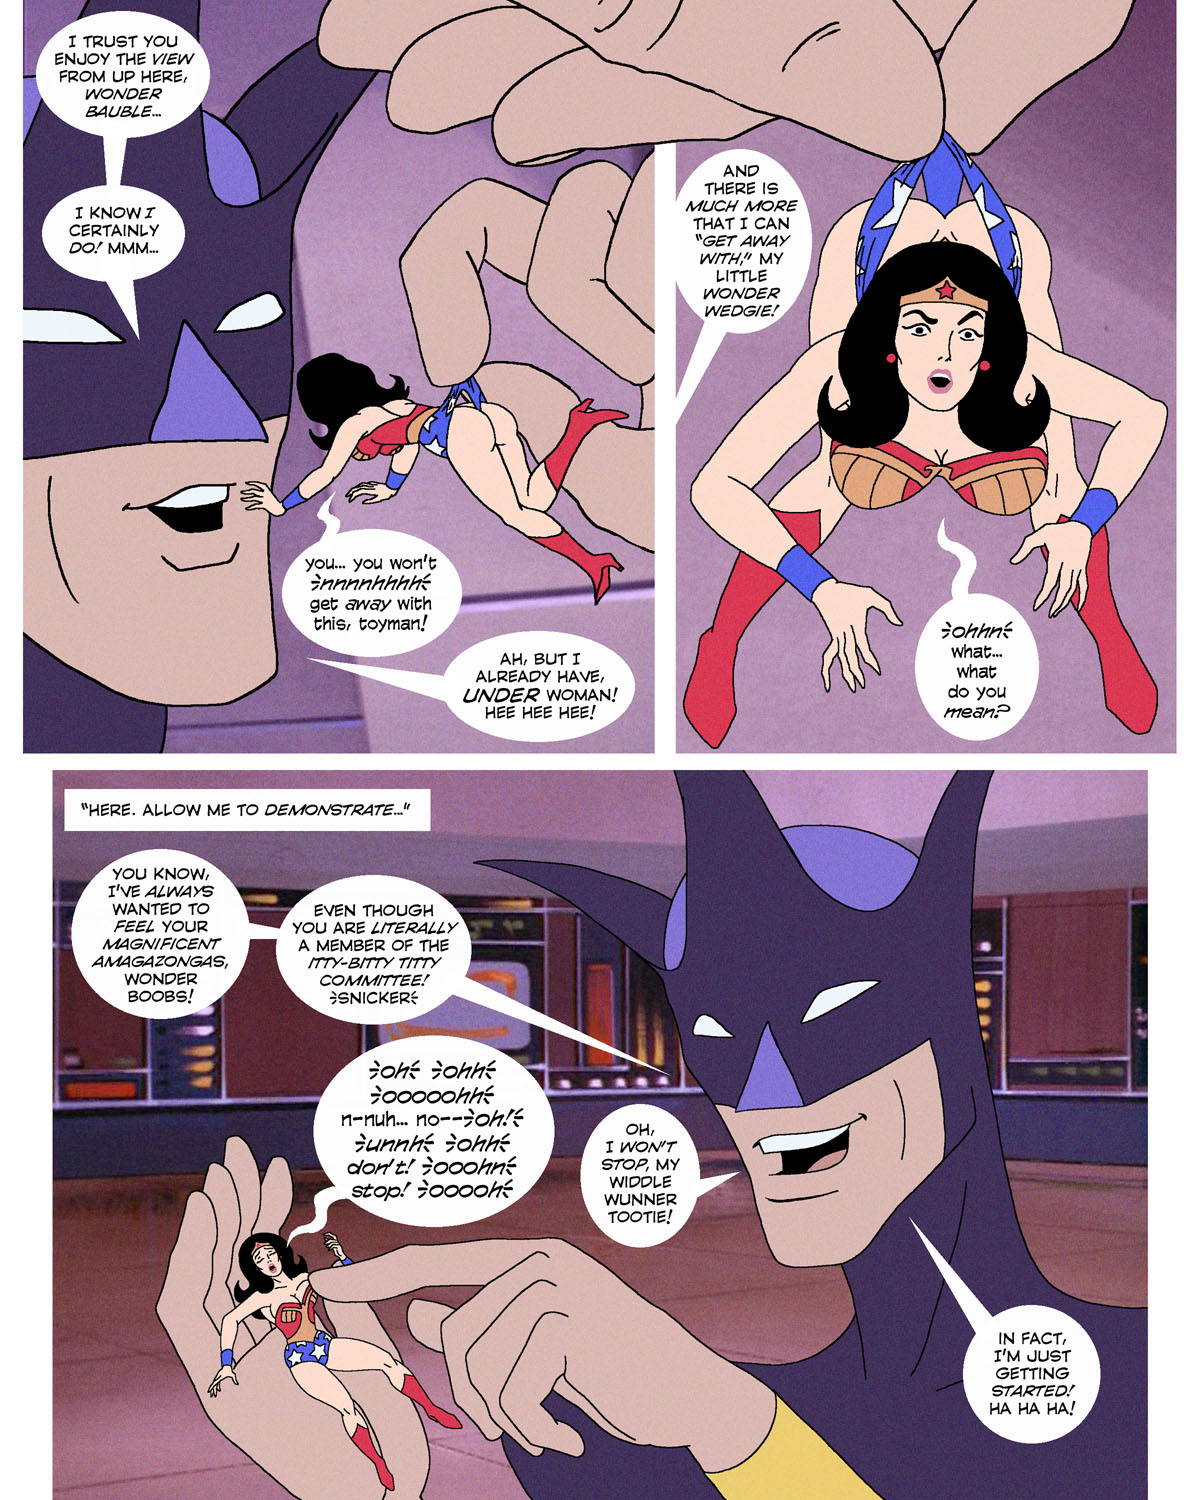 Super Friends with Benefits: Toyman at Large - FreeAdultComix